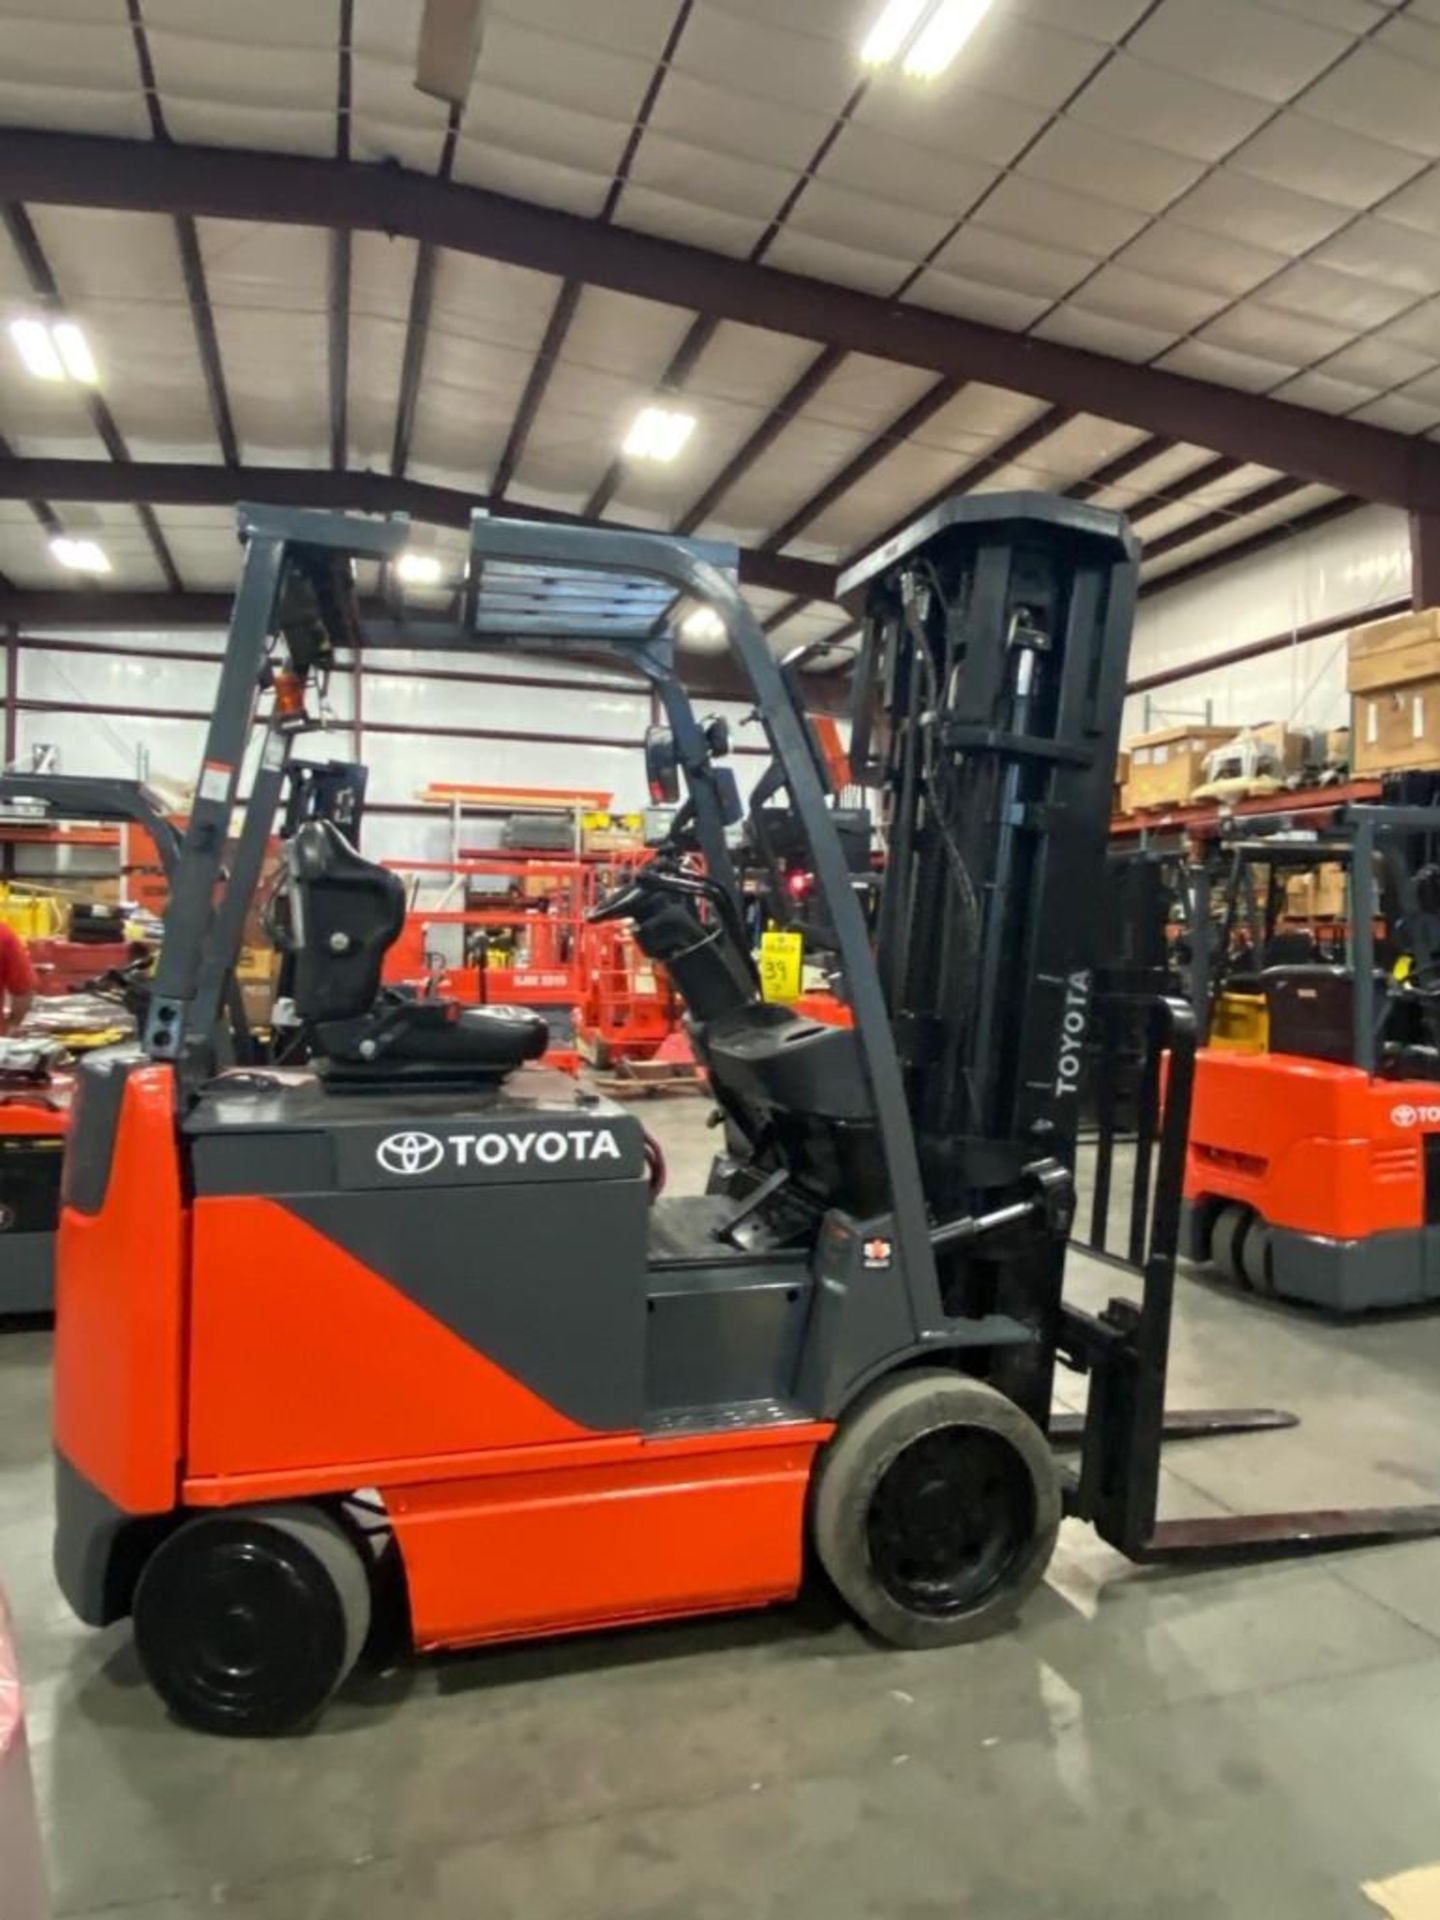 TOYOTA ELECTRIC FORKLIFT MODEL 8FBCU25, 278" HEIGHT CAPACITY, 2017 BATTERY, APPROX. 5,000 LB CAP - Image 4 of 8